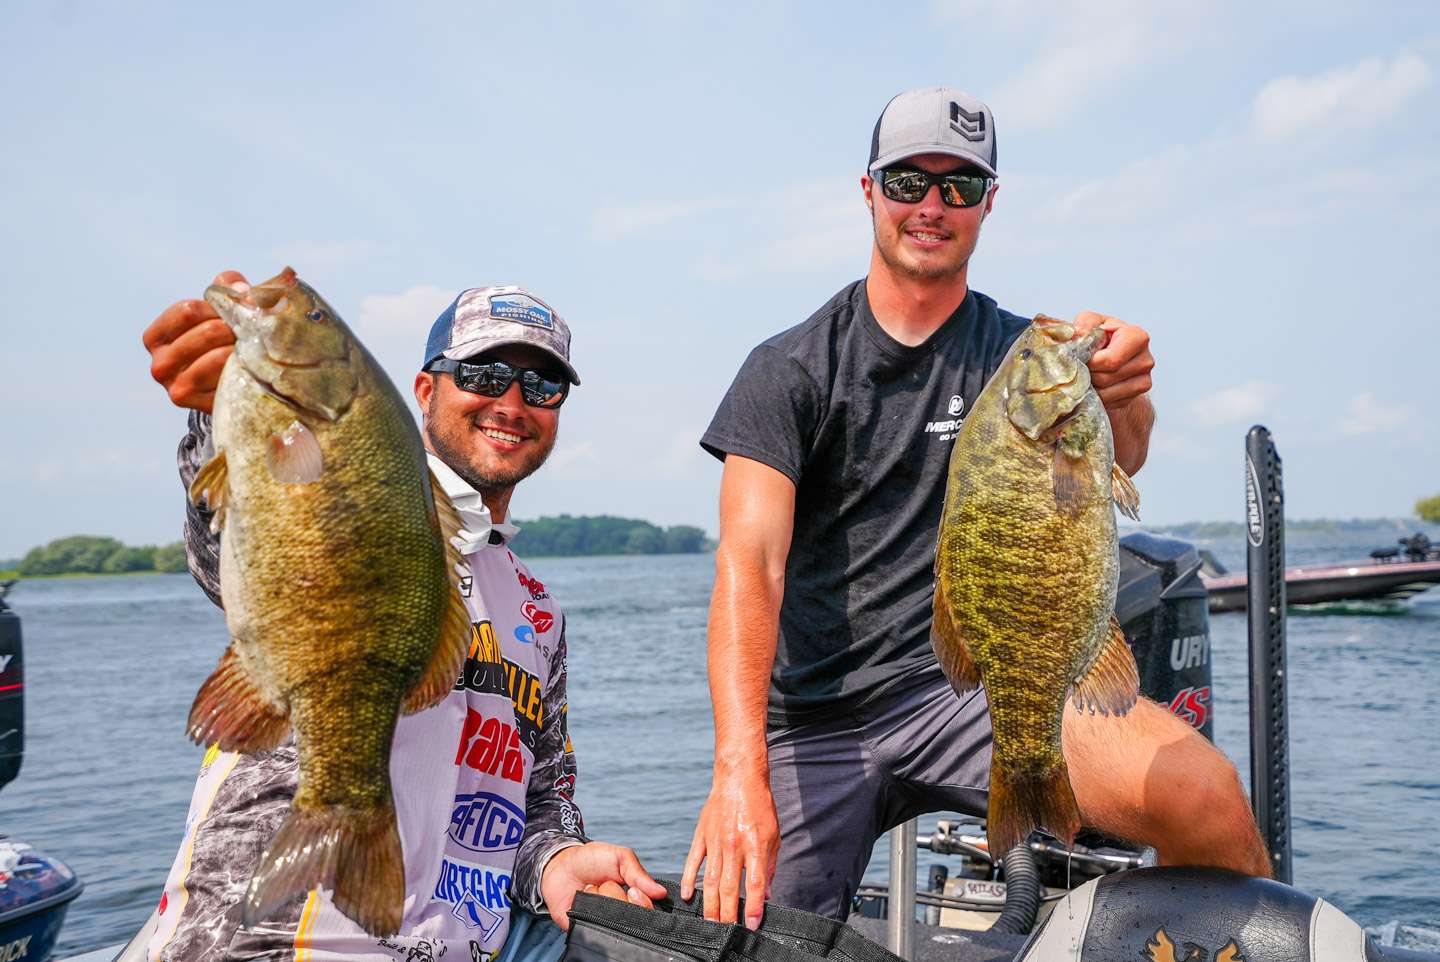 Take a look behind the scenes at all the action from Day 2 of the Carhartt Bassmaster College Series National Championship presented by Bass Pro Shops at the St. Lawrence River.